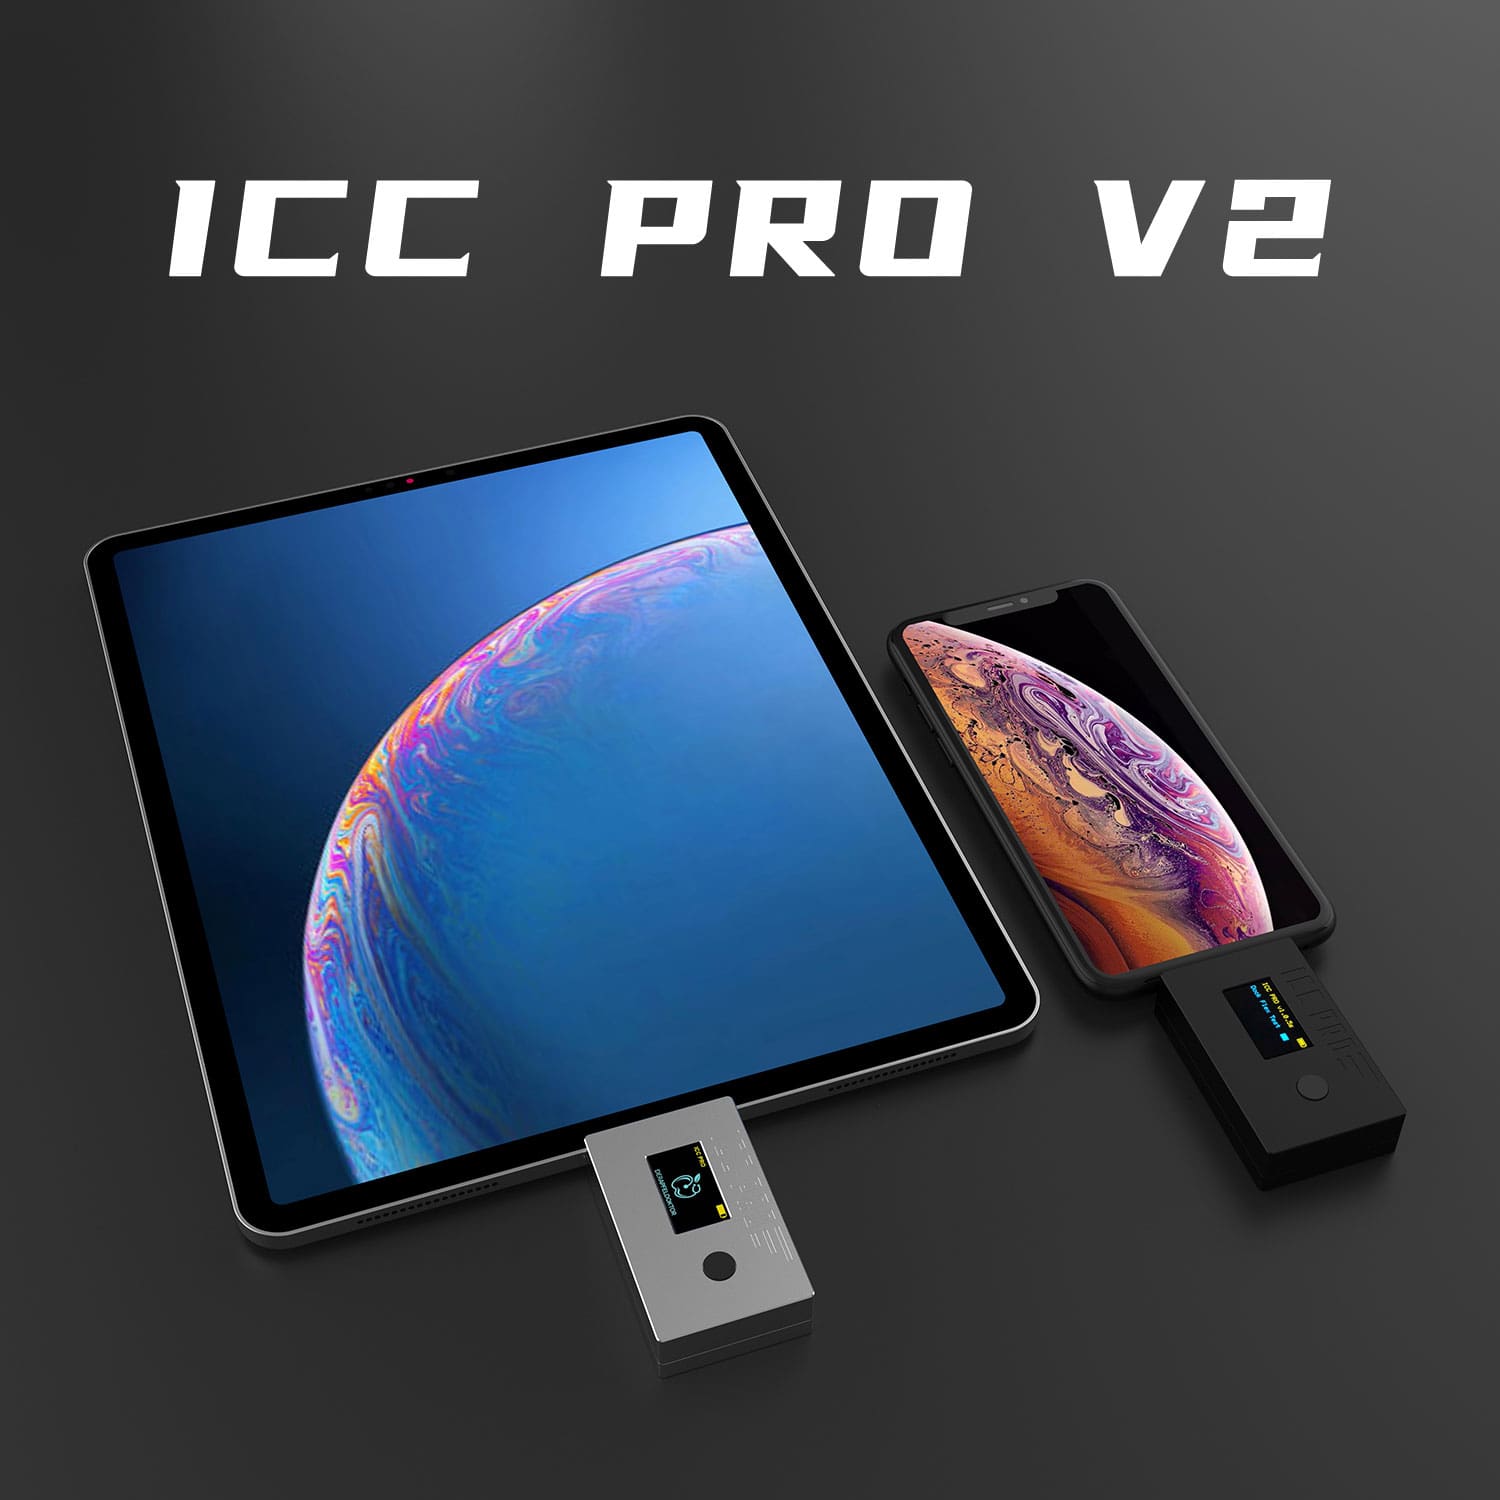 ICC Pro V2 Tristar Hydra Tester For iPhone/iPad